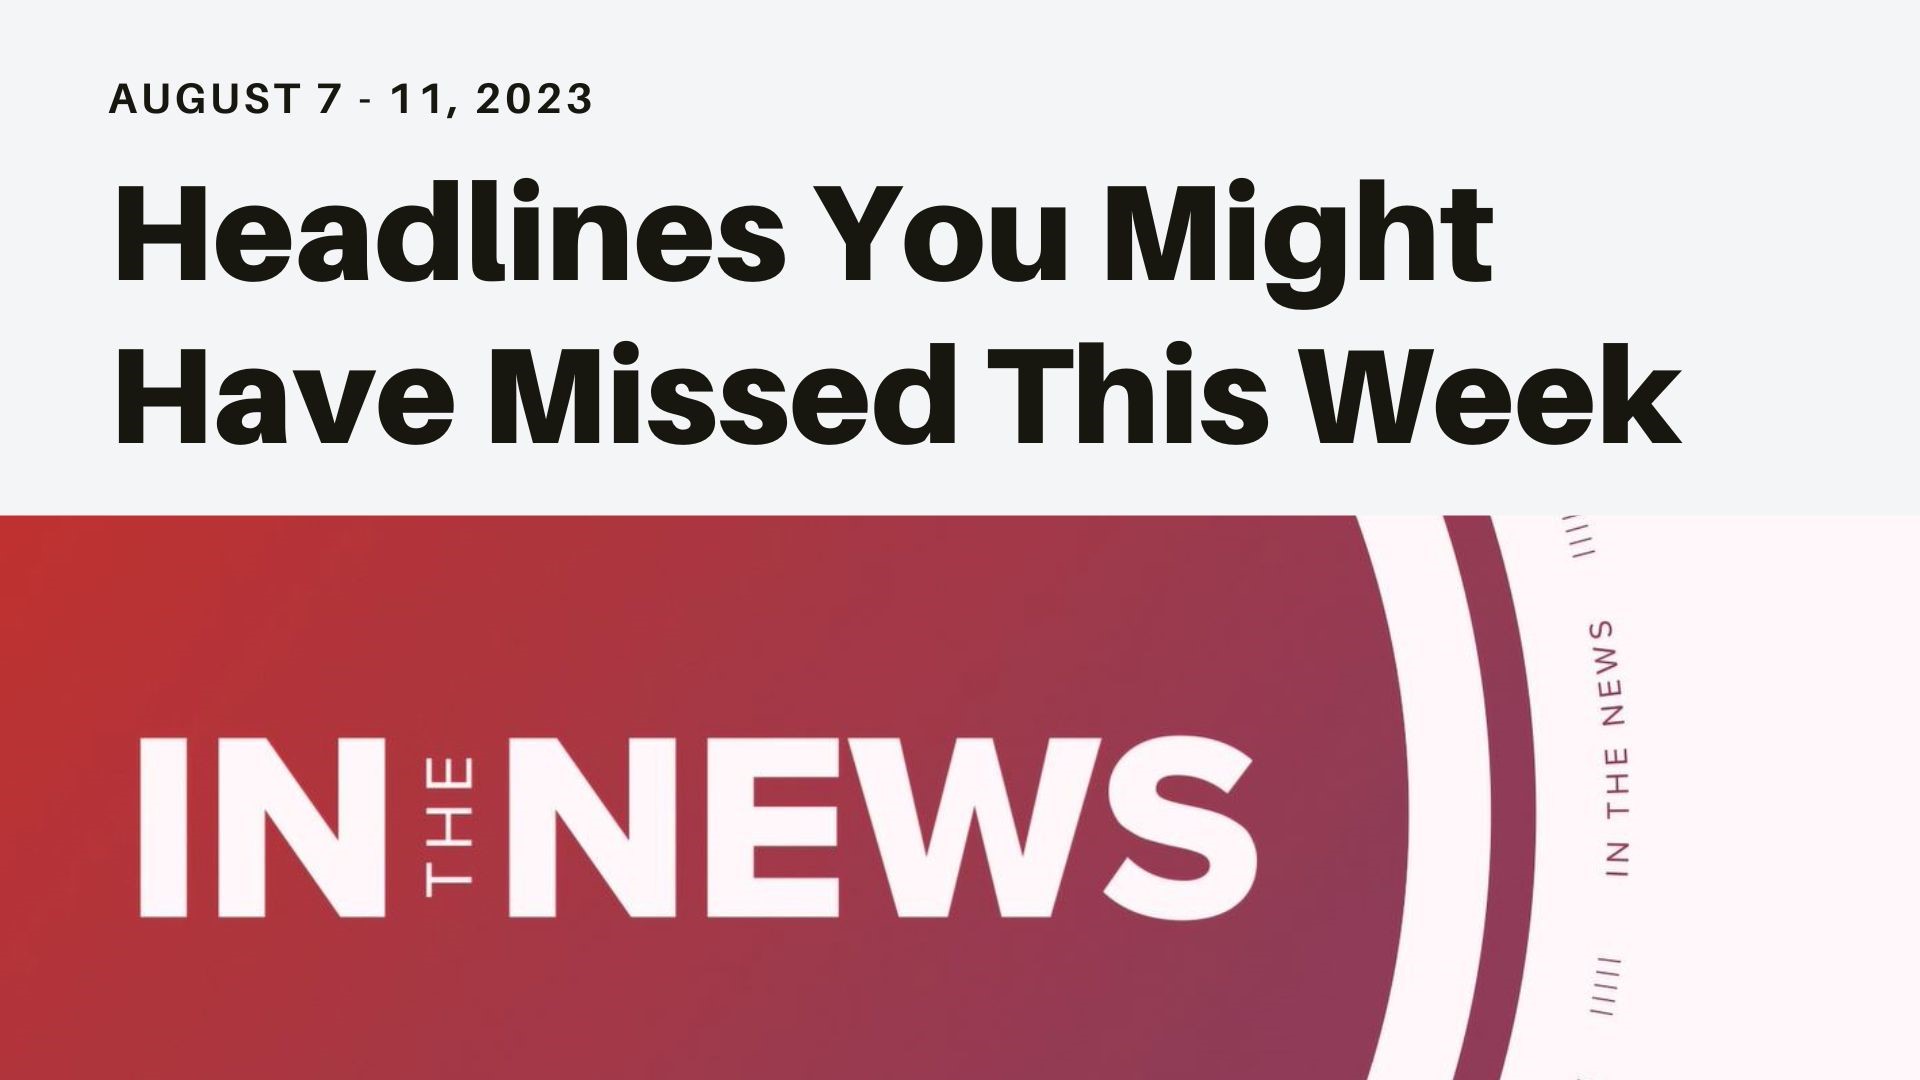 Headlines you might have missed this week from wildfires in Maui to new FDA guidelines on blood donation and Mattel offers a new 'weird barbie' doll.